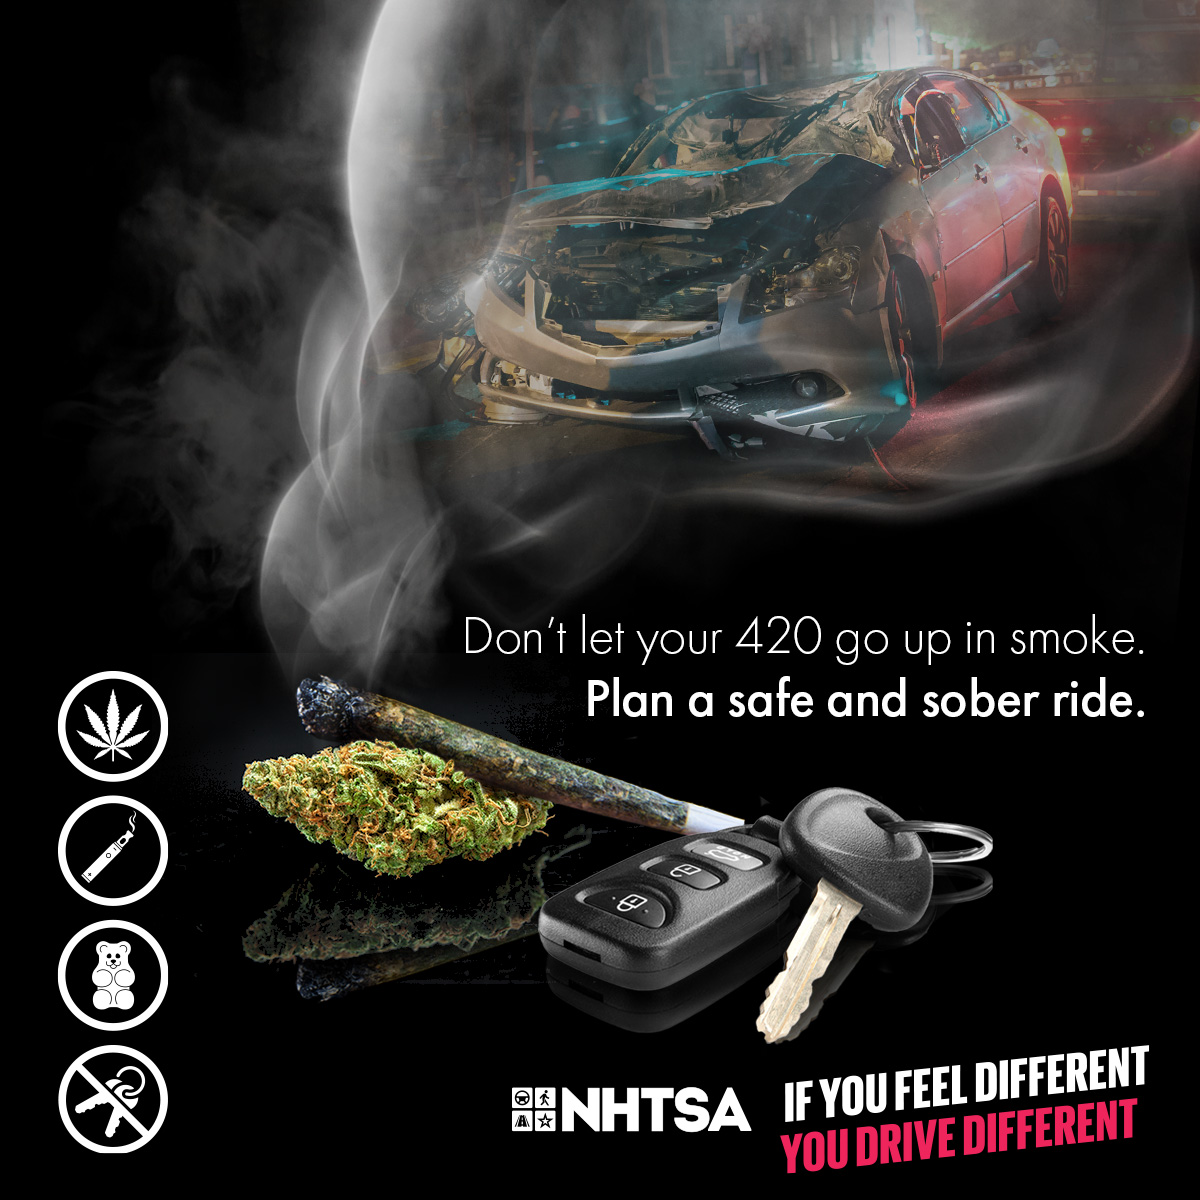 How to drive safely isn’t one of life’s great mysteries 🤔💭… If you’re impaired, don’t get behind the wheel. If You Feel Different, You Drive Different. 📸 @nhtsagov #ImpairedDriving #420 #DriveSafe #DriveSmart #FeelDifferentDriveDifferent